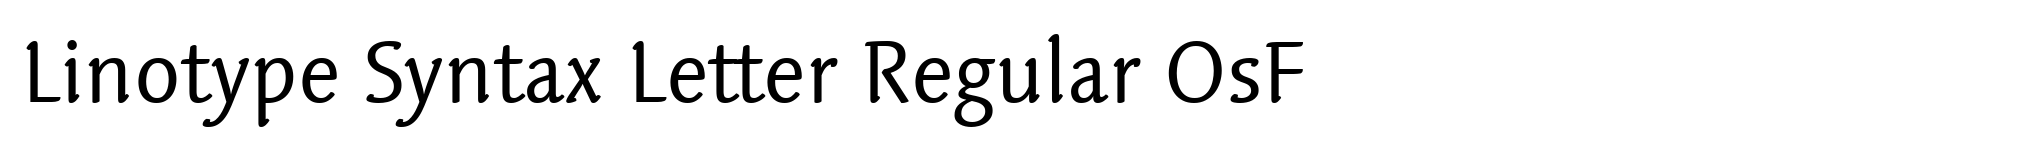 Linotype Syntax Letter Regular OsF image